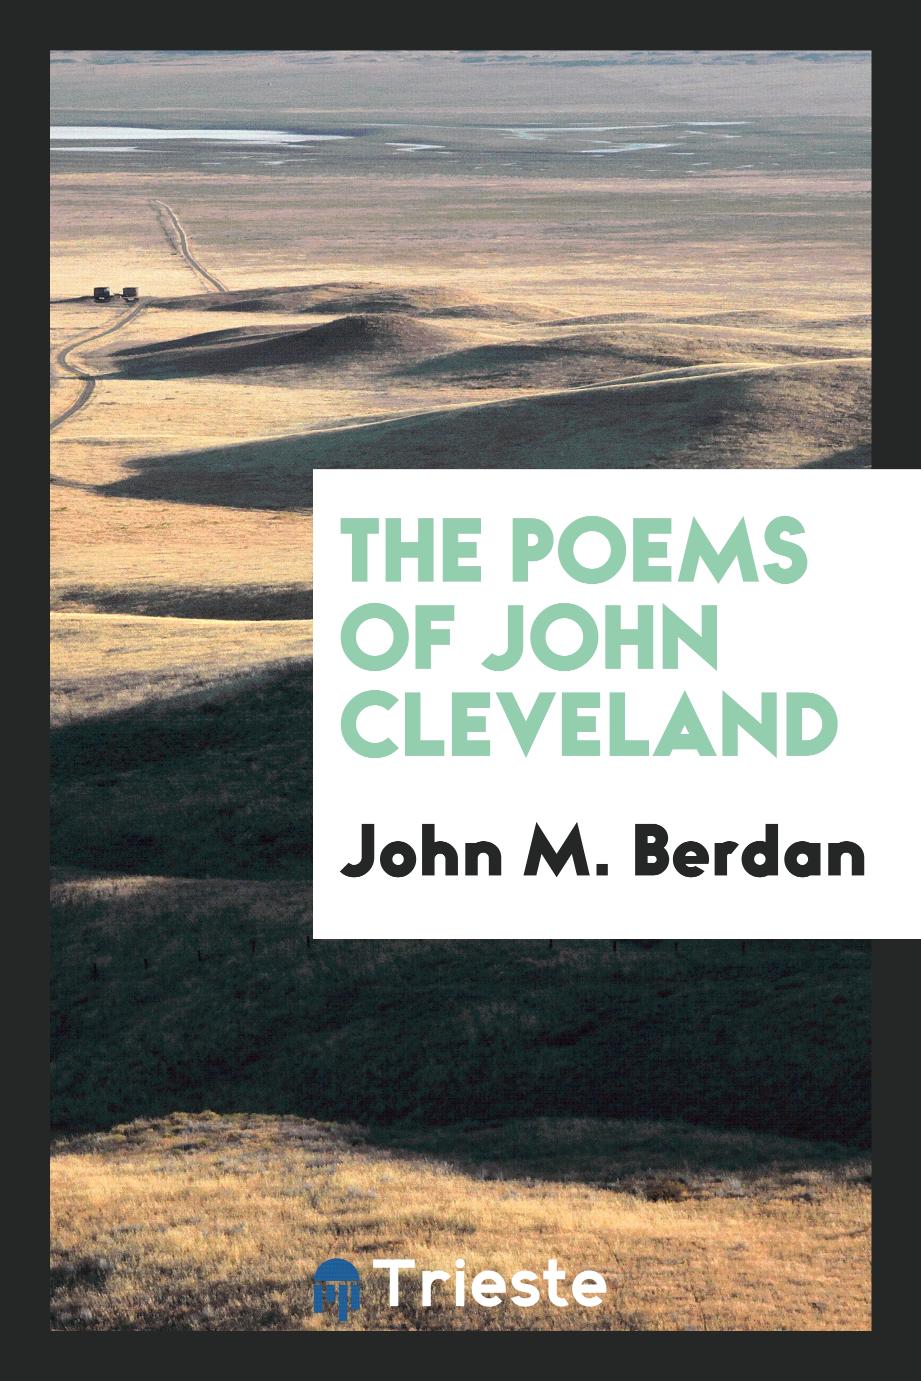 The poems of John Cleveland